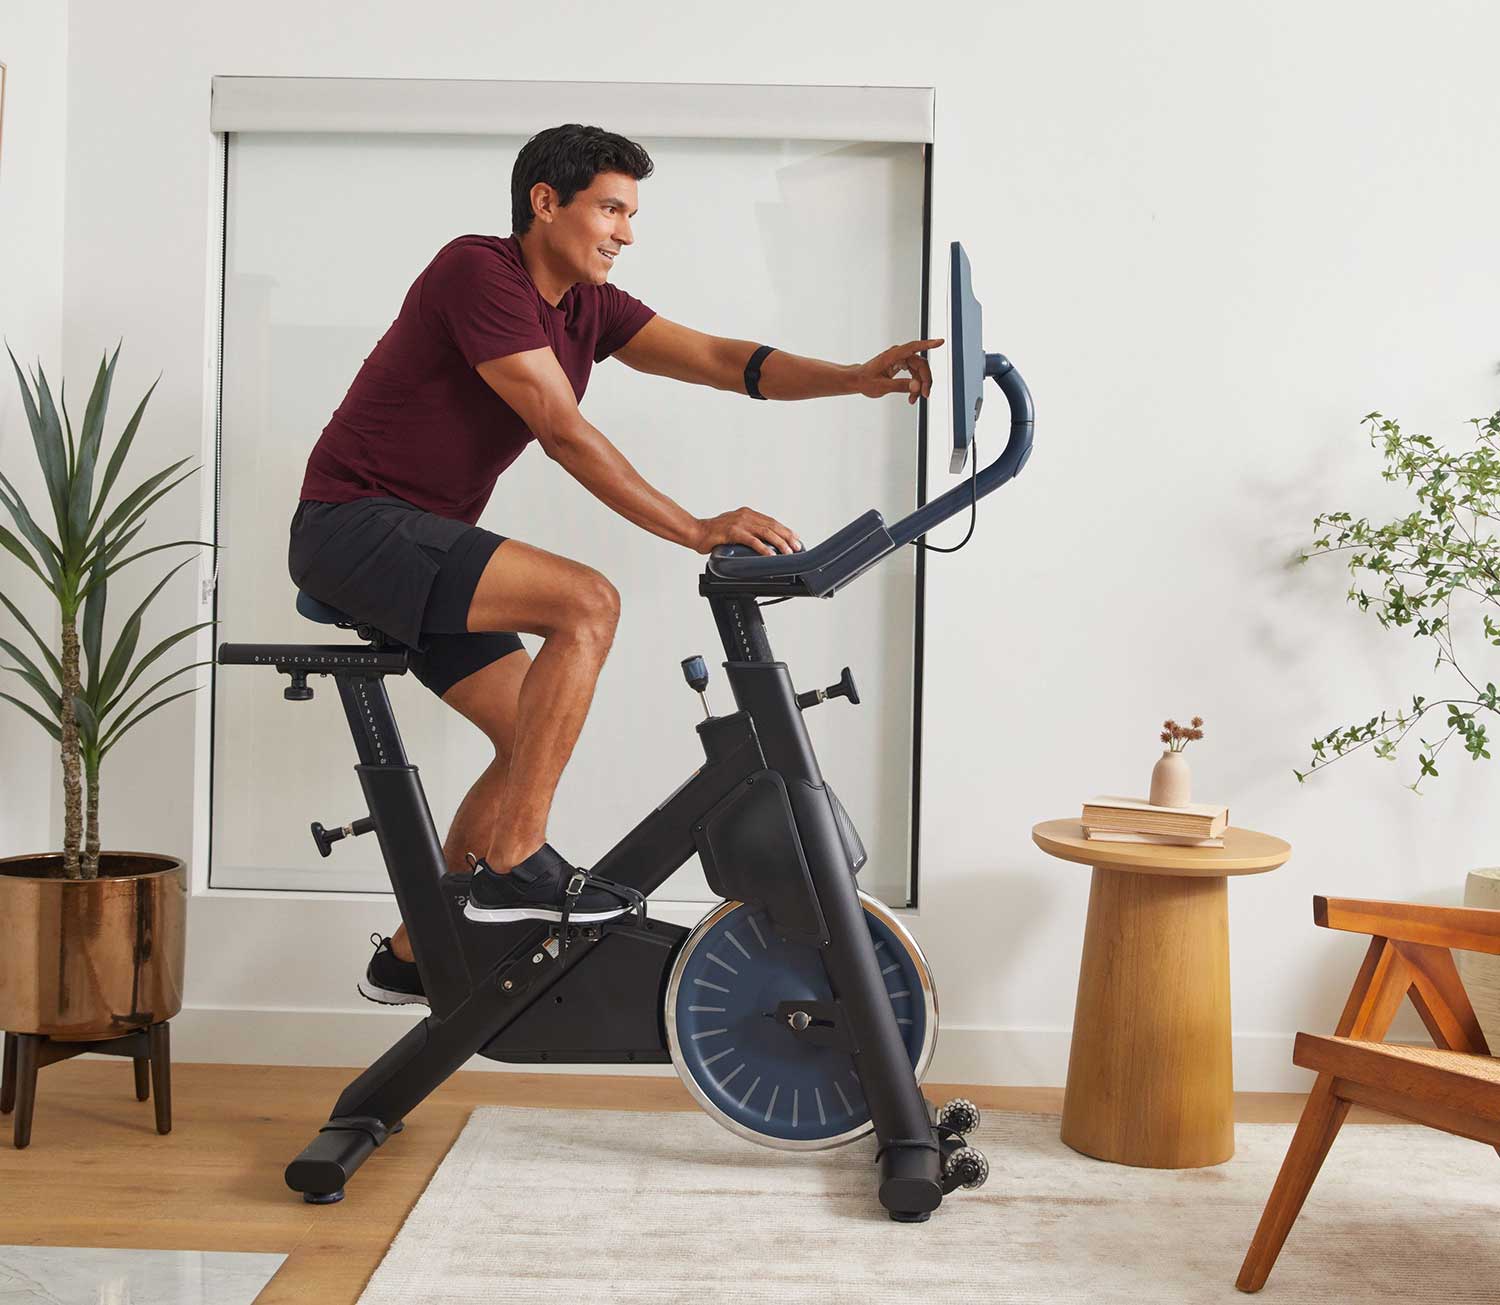 BODi+MYXFitness customer selecting his workout on his new MYX excercise bike